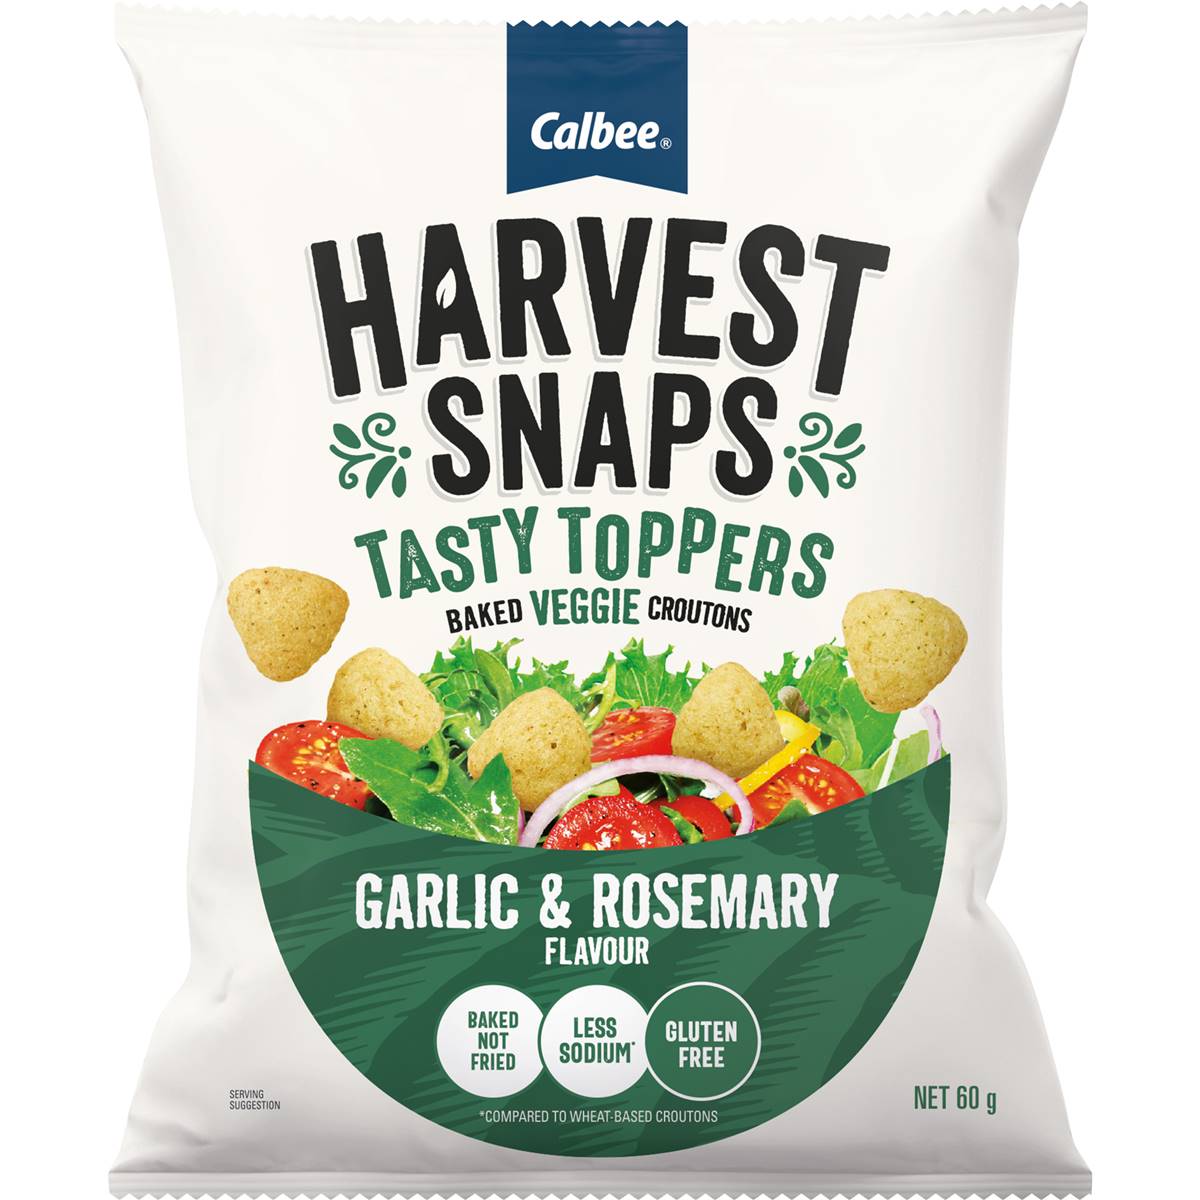 Calories in Calbee Harvest Snaps Tasty Toppers Garlic & Rosemary Flavour